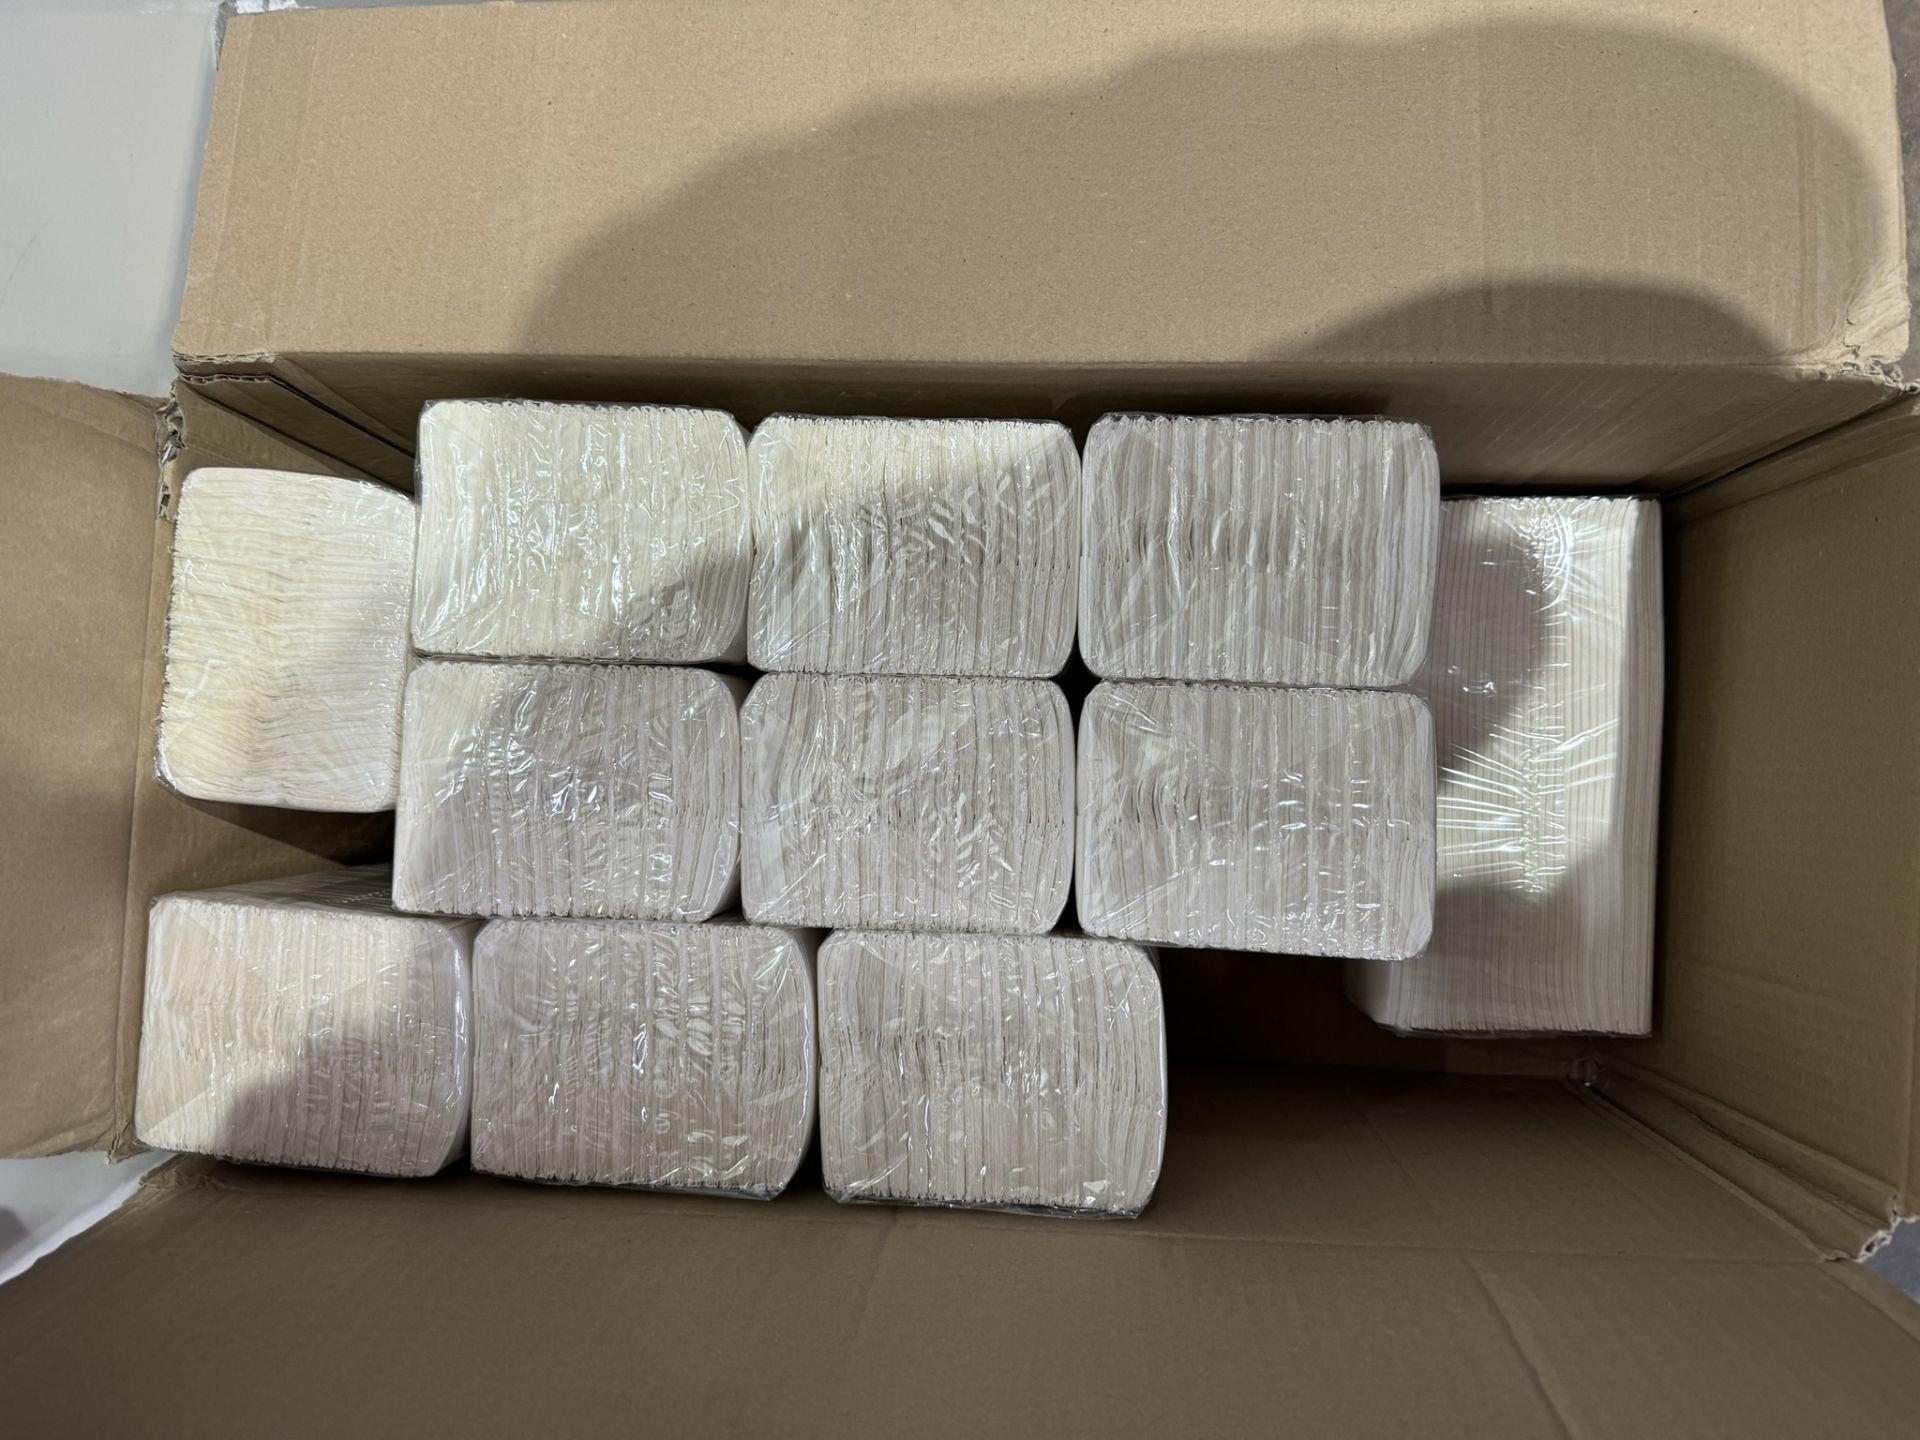 4 x Boxes Redi Paper 2 Ply White Hand Towel C Fold - Image 4 of 6